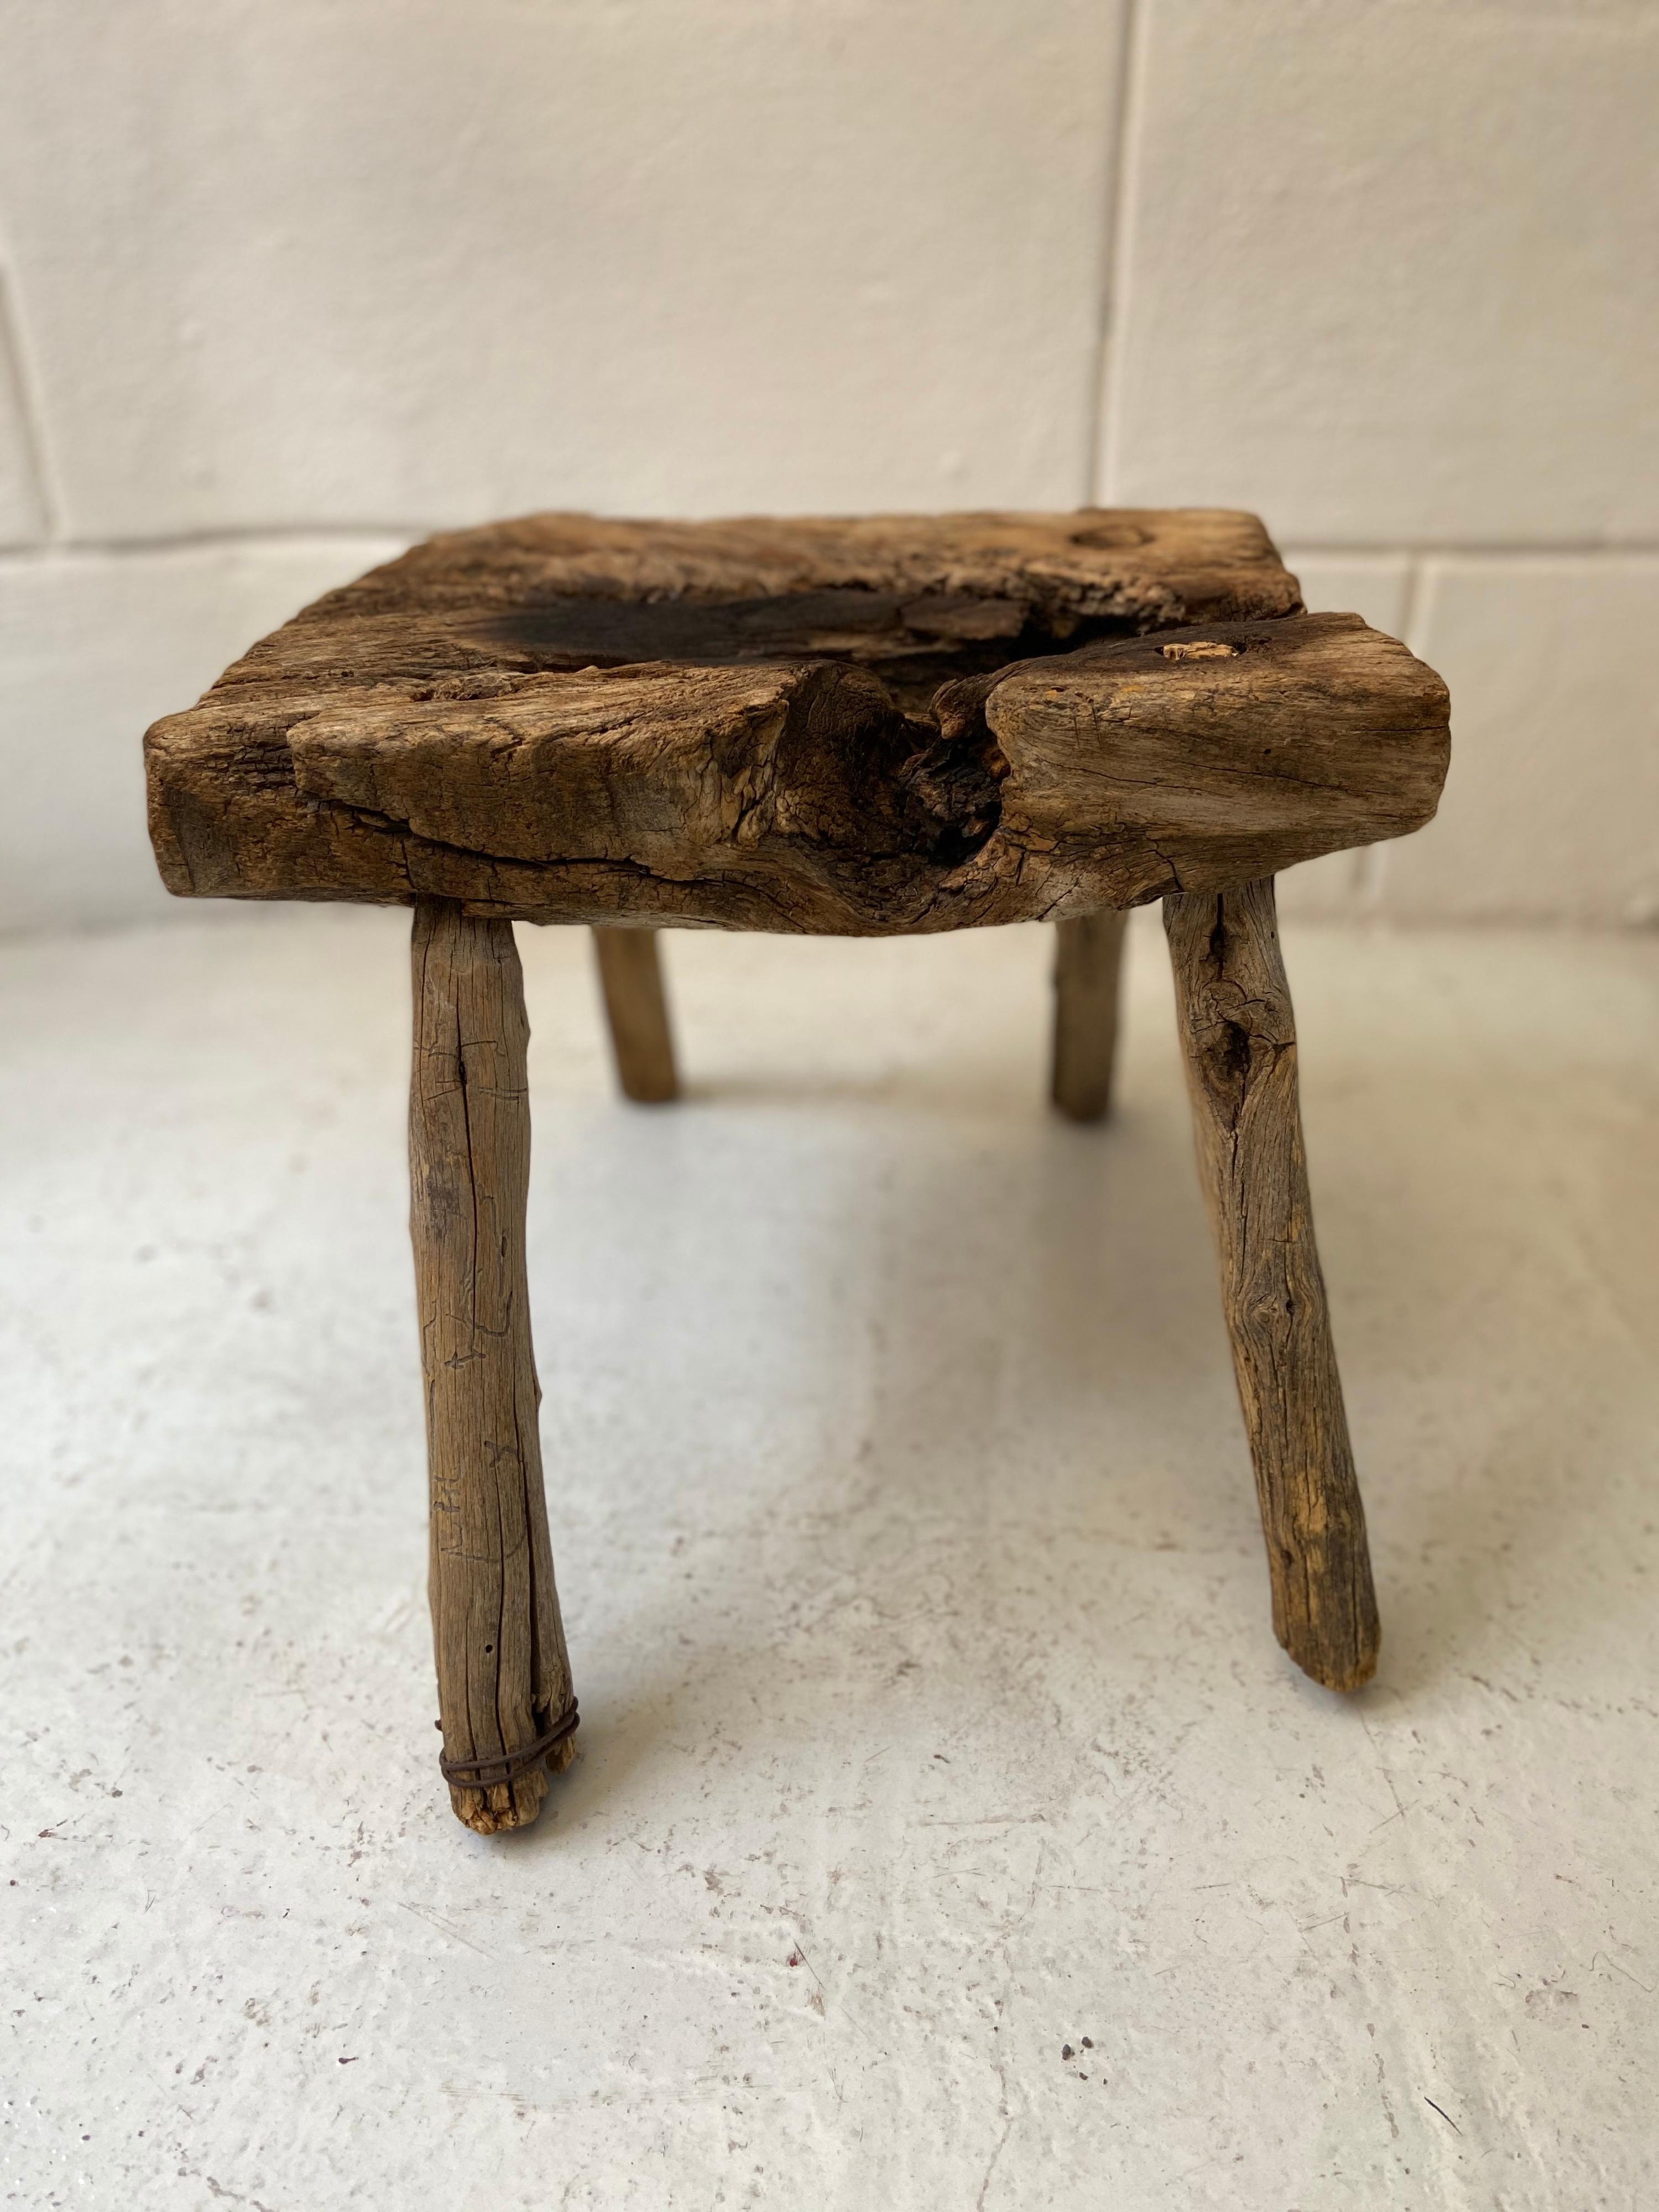 Rustic Mesquite Stool from Mexico, circa 1950s